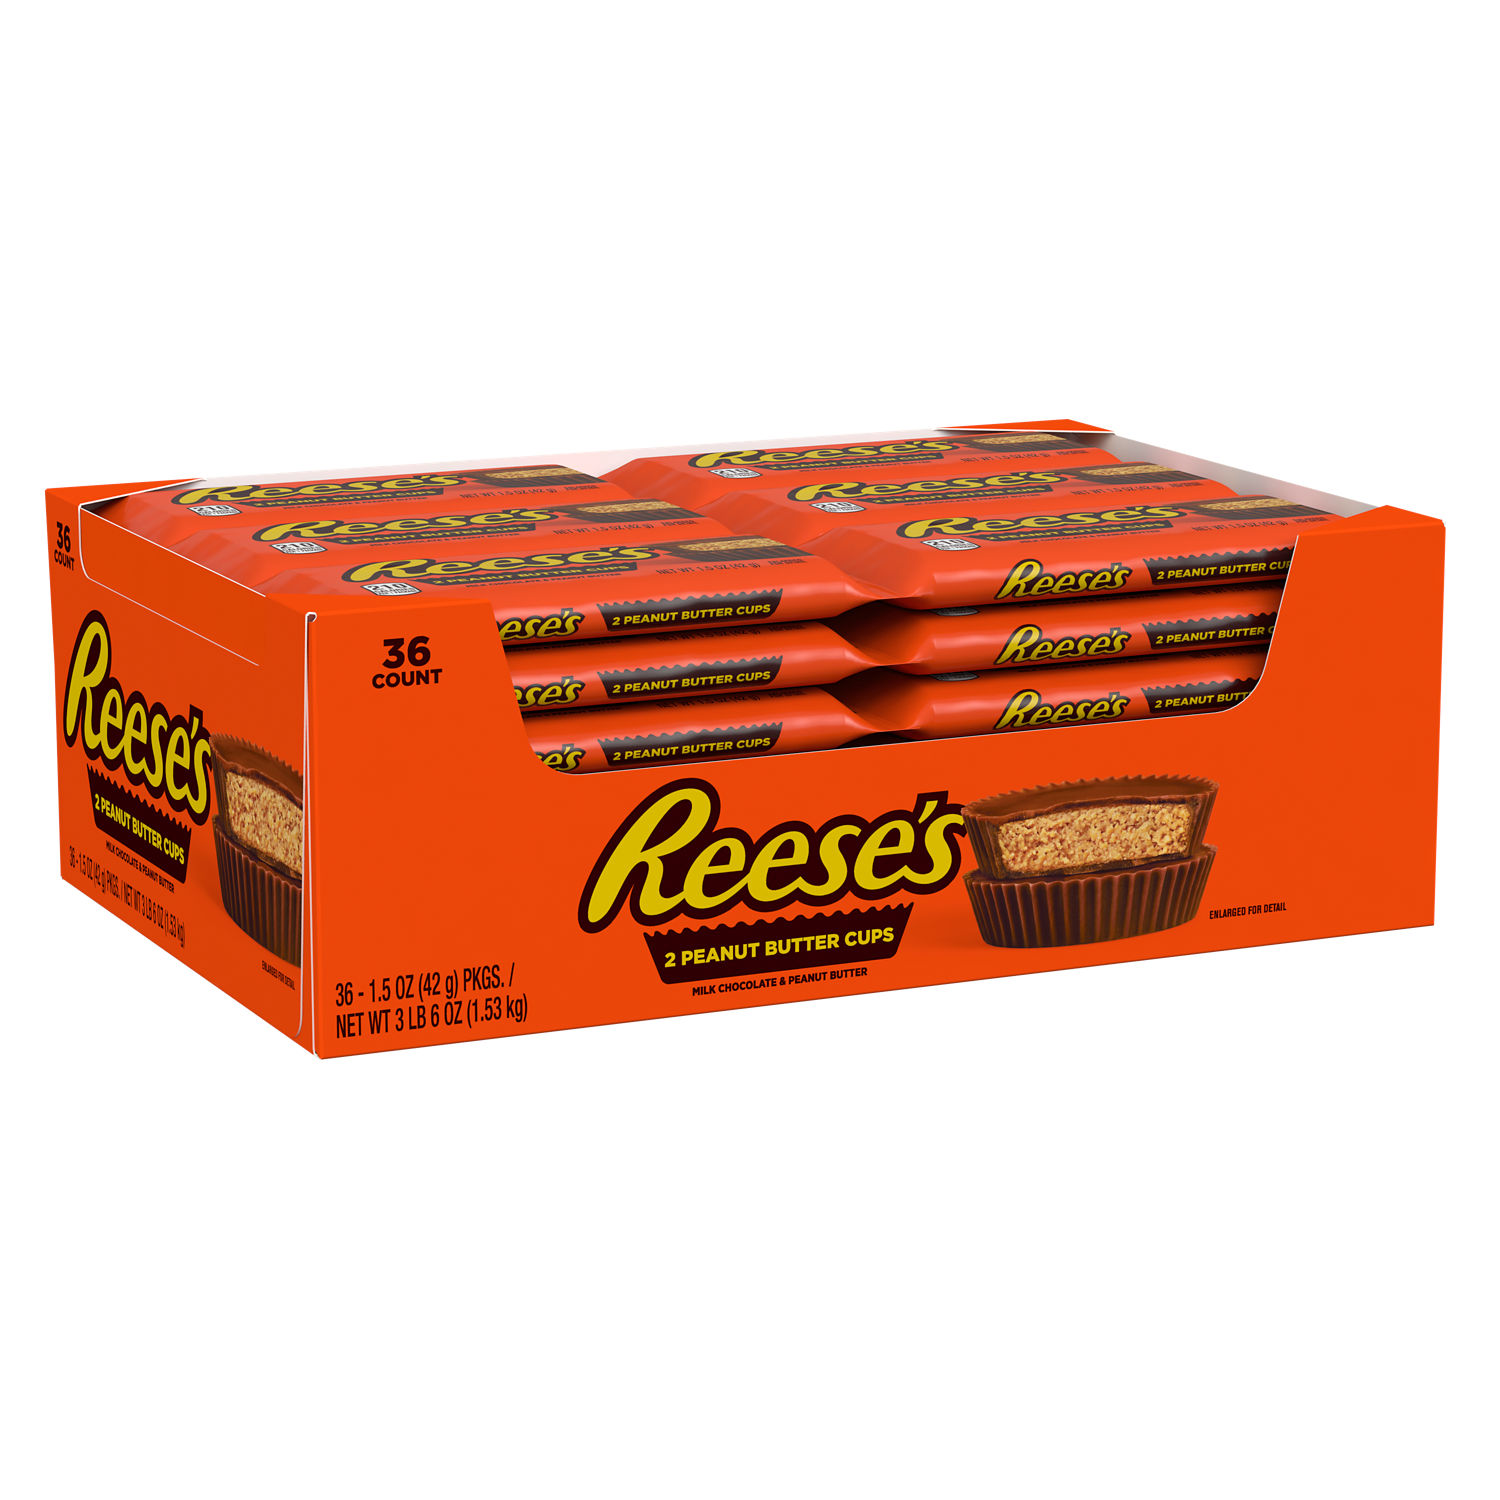 Reese's Peanut Butter Cups - 2 cups, 1.5 oz